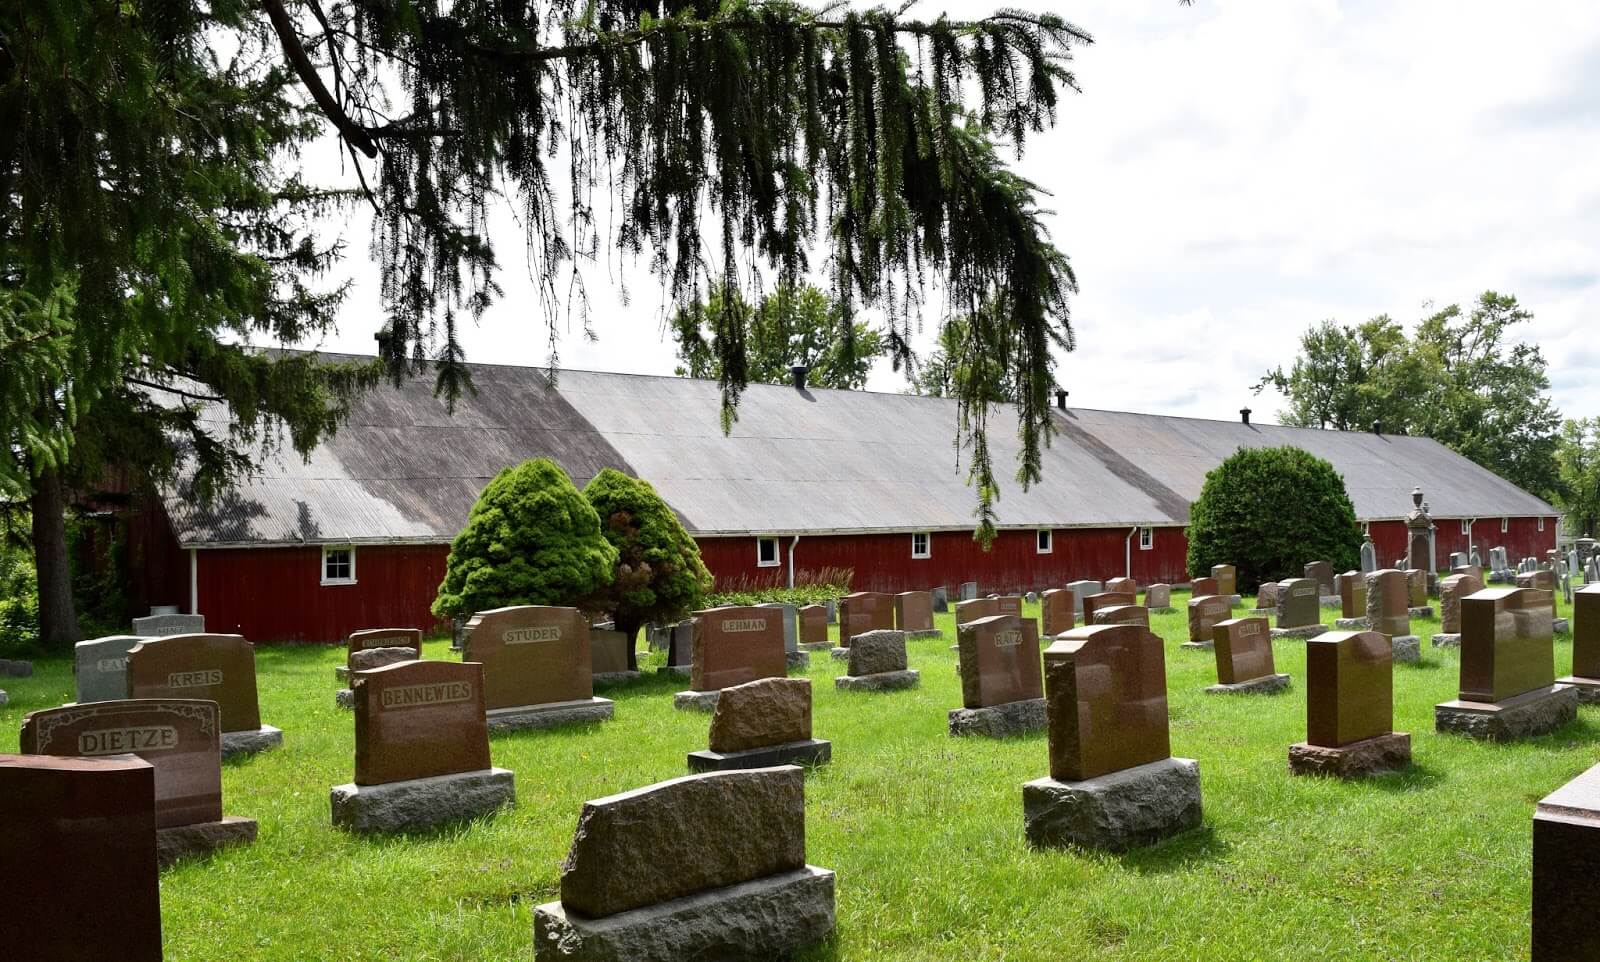 An old, red buggy barn at a cemetery.